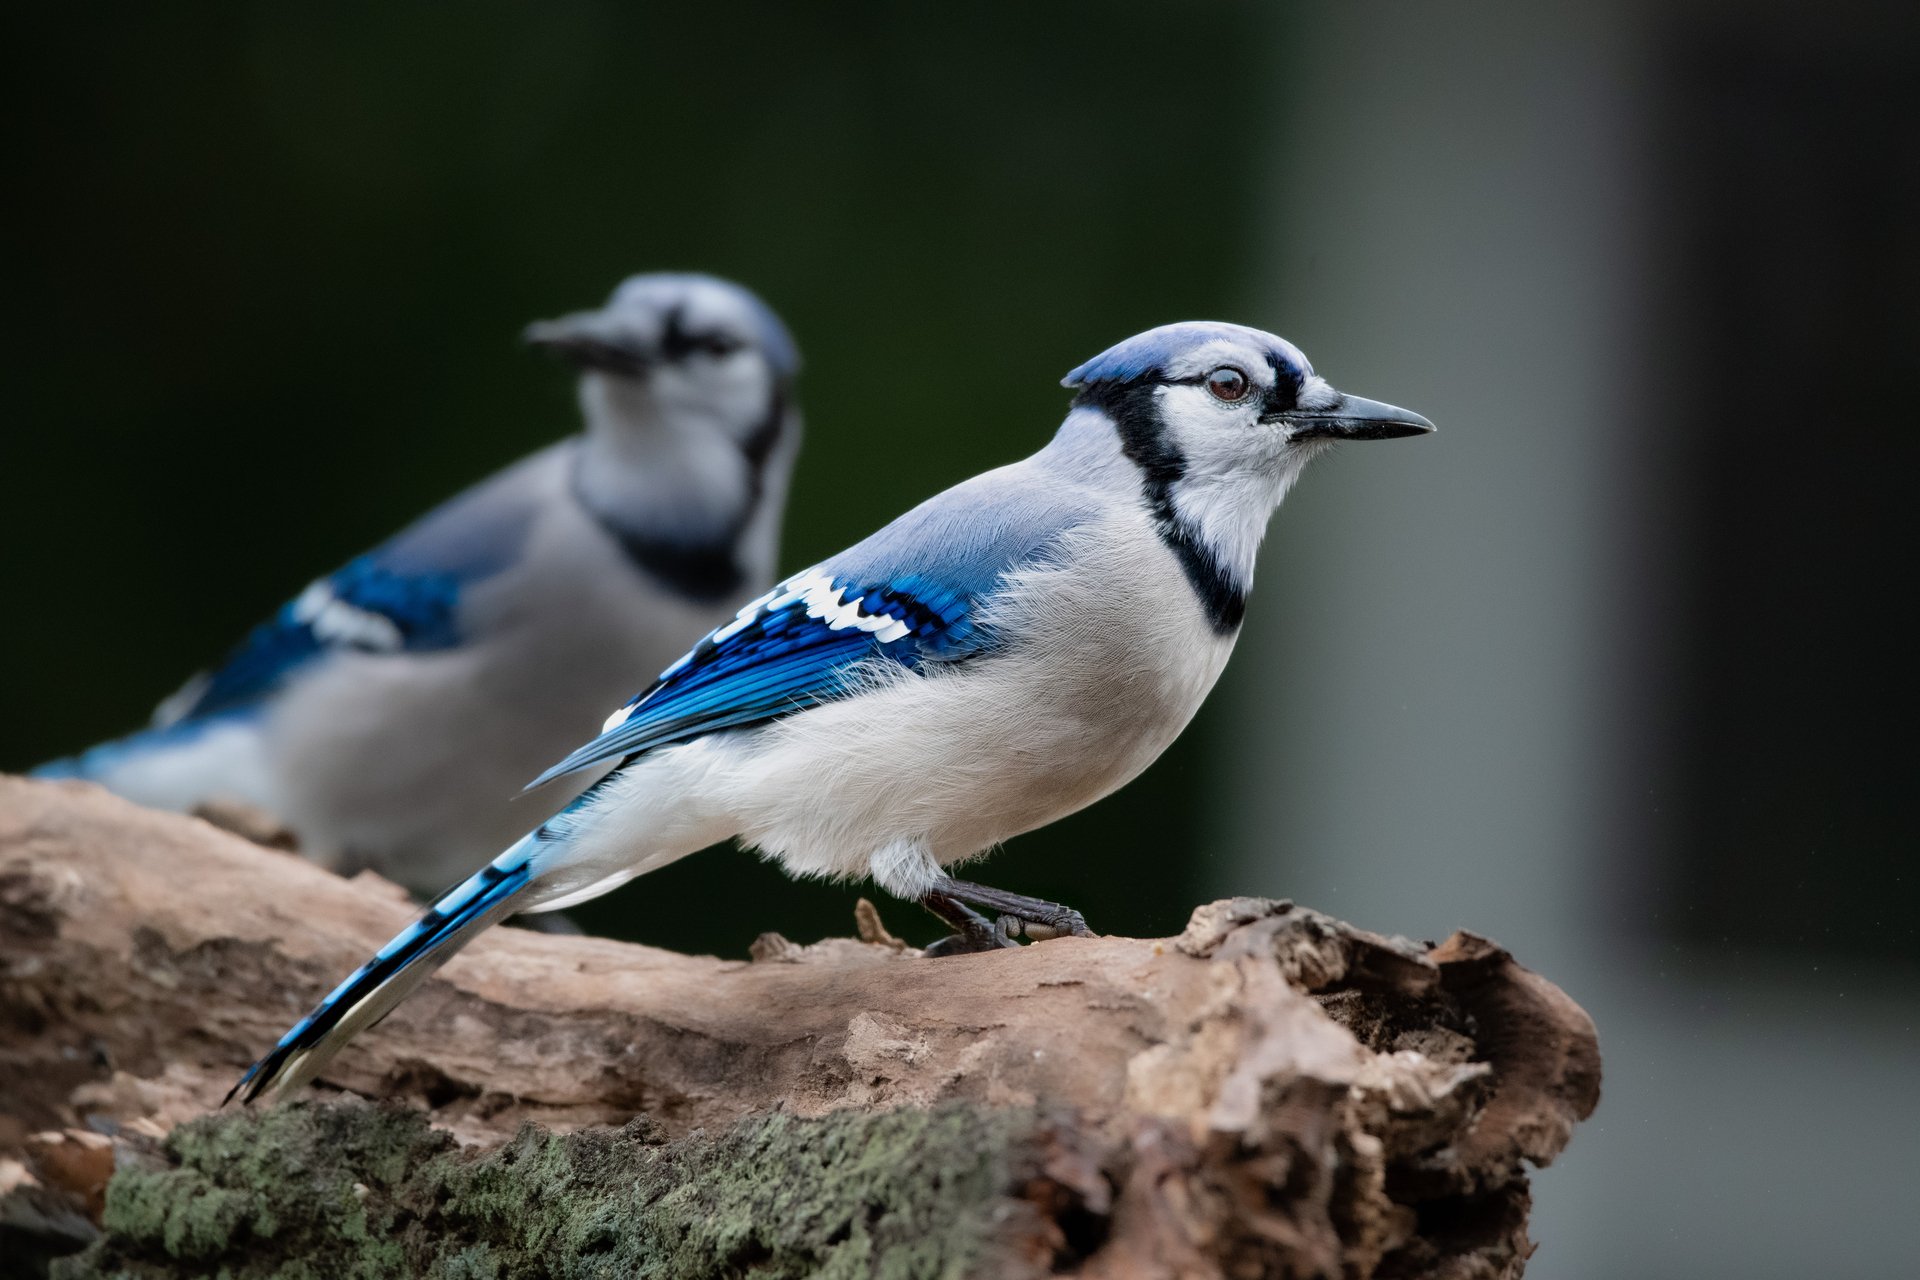 Two blue jays sitting on branch